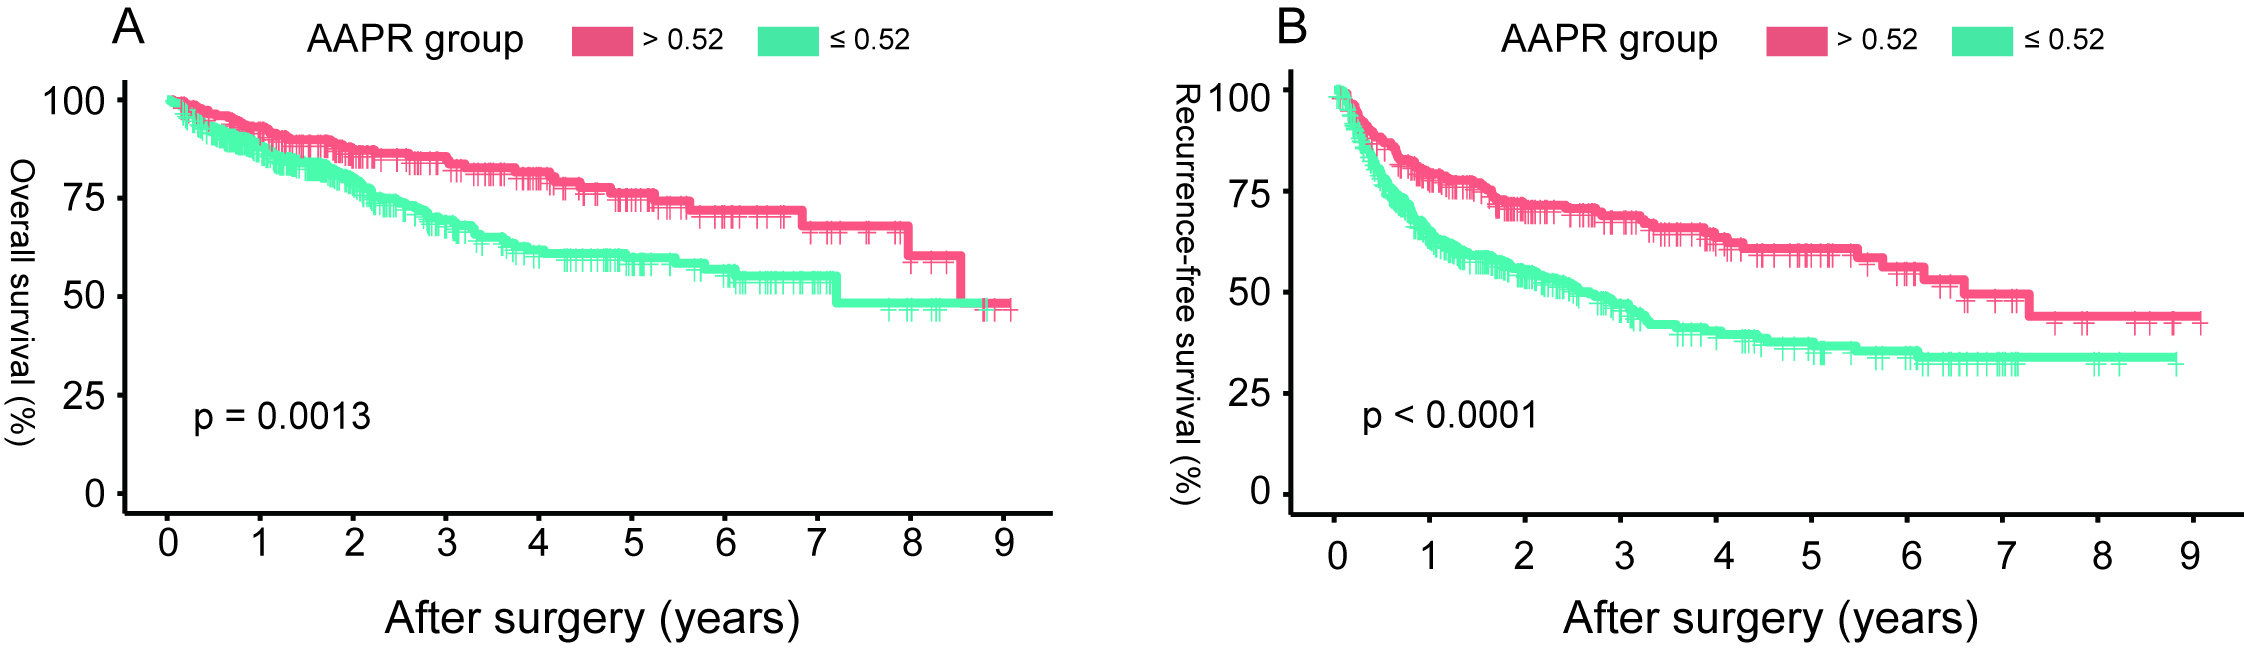 The overall survival (A) and recurrence-free survival (B) based on the AAPR cut-off value of 0.52 in HCC patients undergoing radical resection. (HCC: hepatocellular carcinoma; AAPR: albuminalkaline phosphatase ratio).